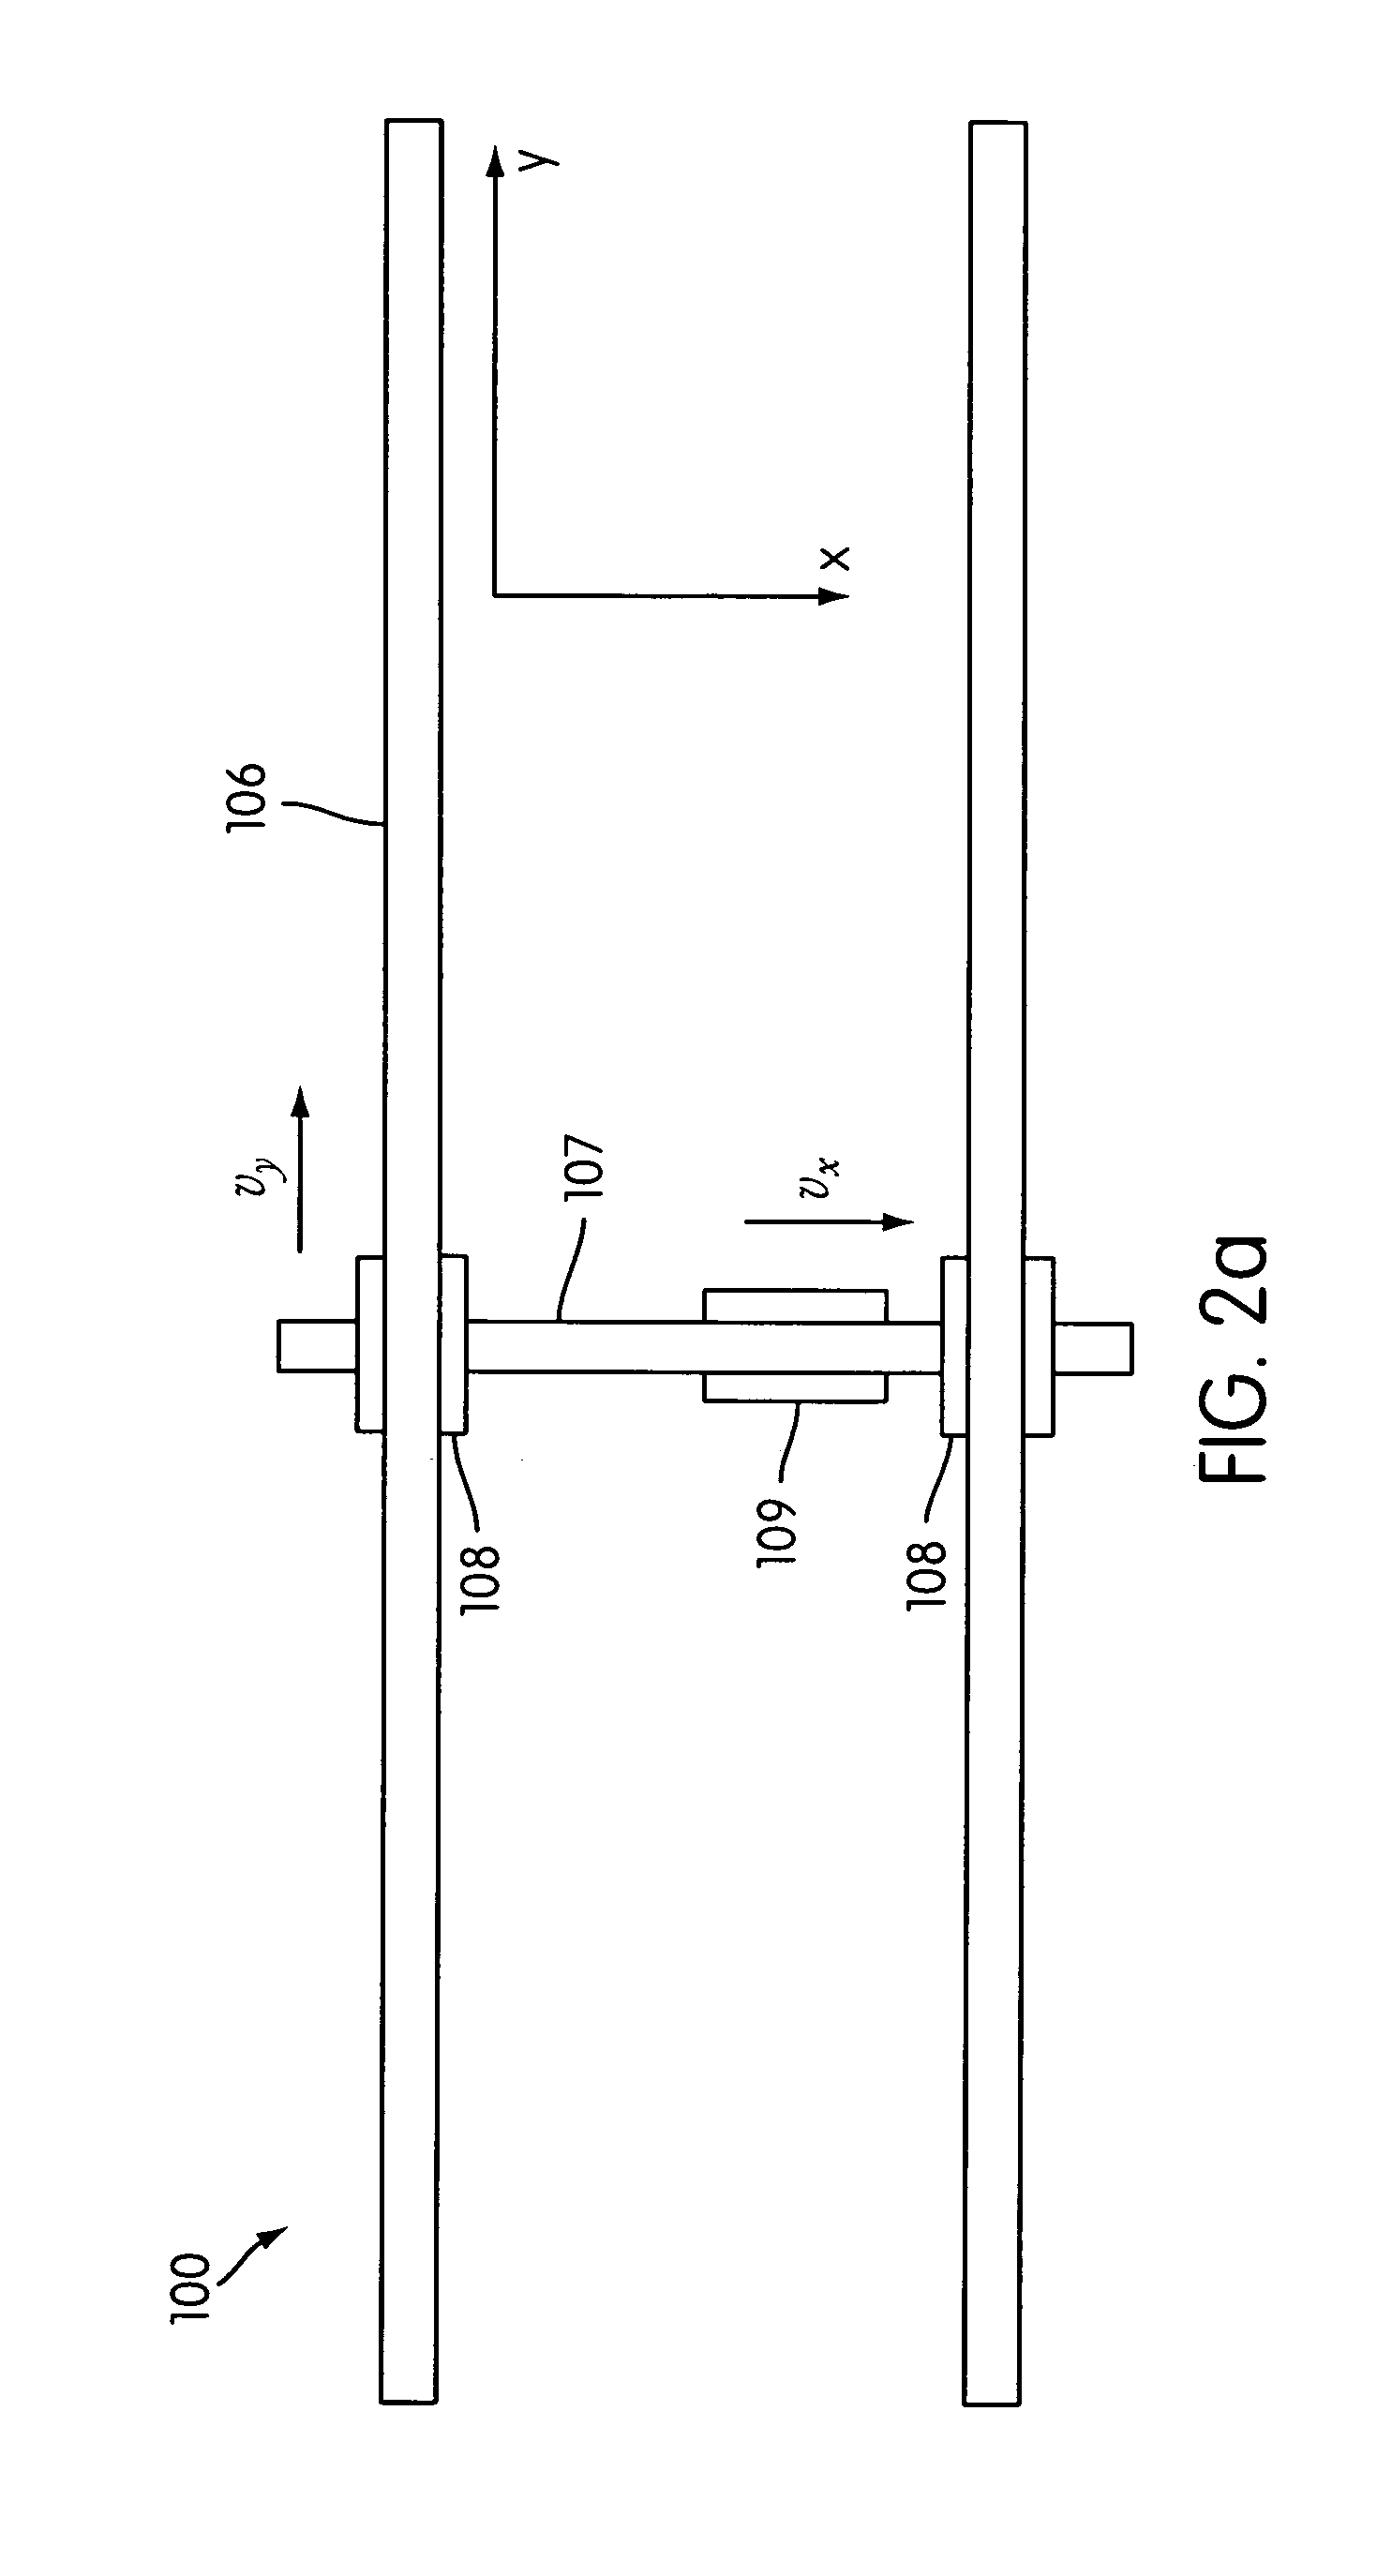 Methods and apparatus for eliminating instability in intelligent assist devices